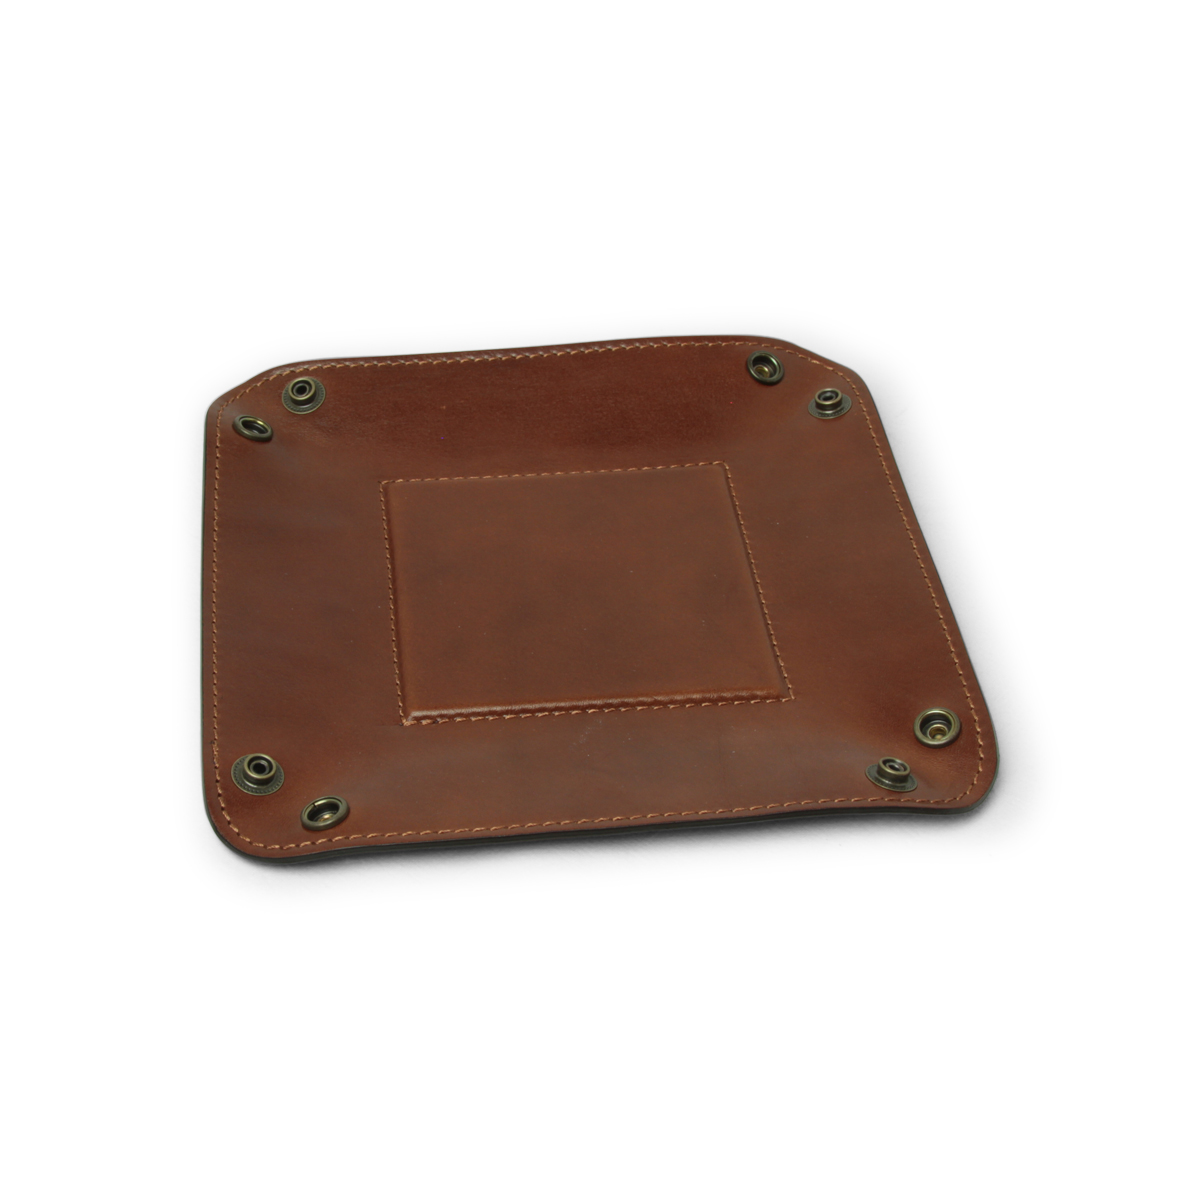 Full grain leather valet tray - brown|755589MA|Old Angler Firenze